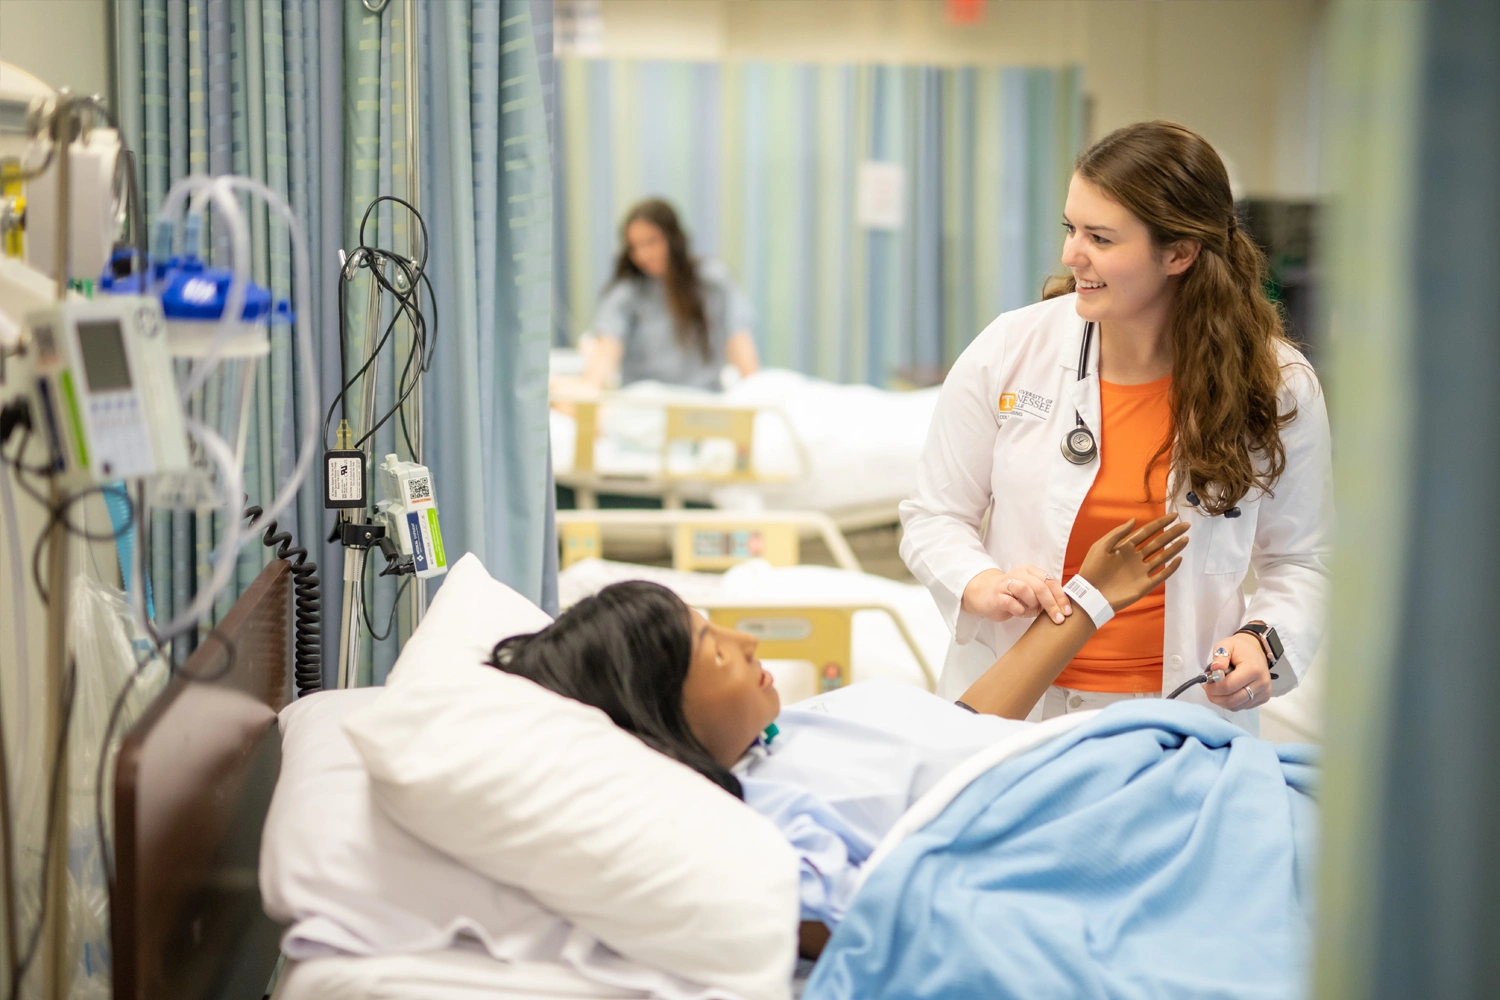 A nurse takes a patient's pulse while smiling and looking at medical readings in a hospital